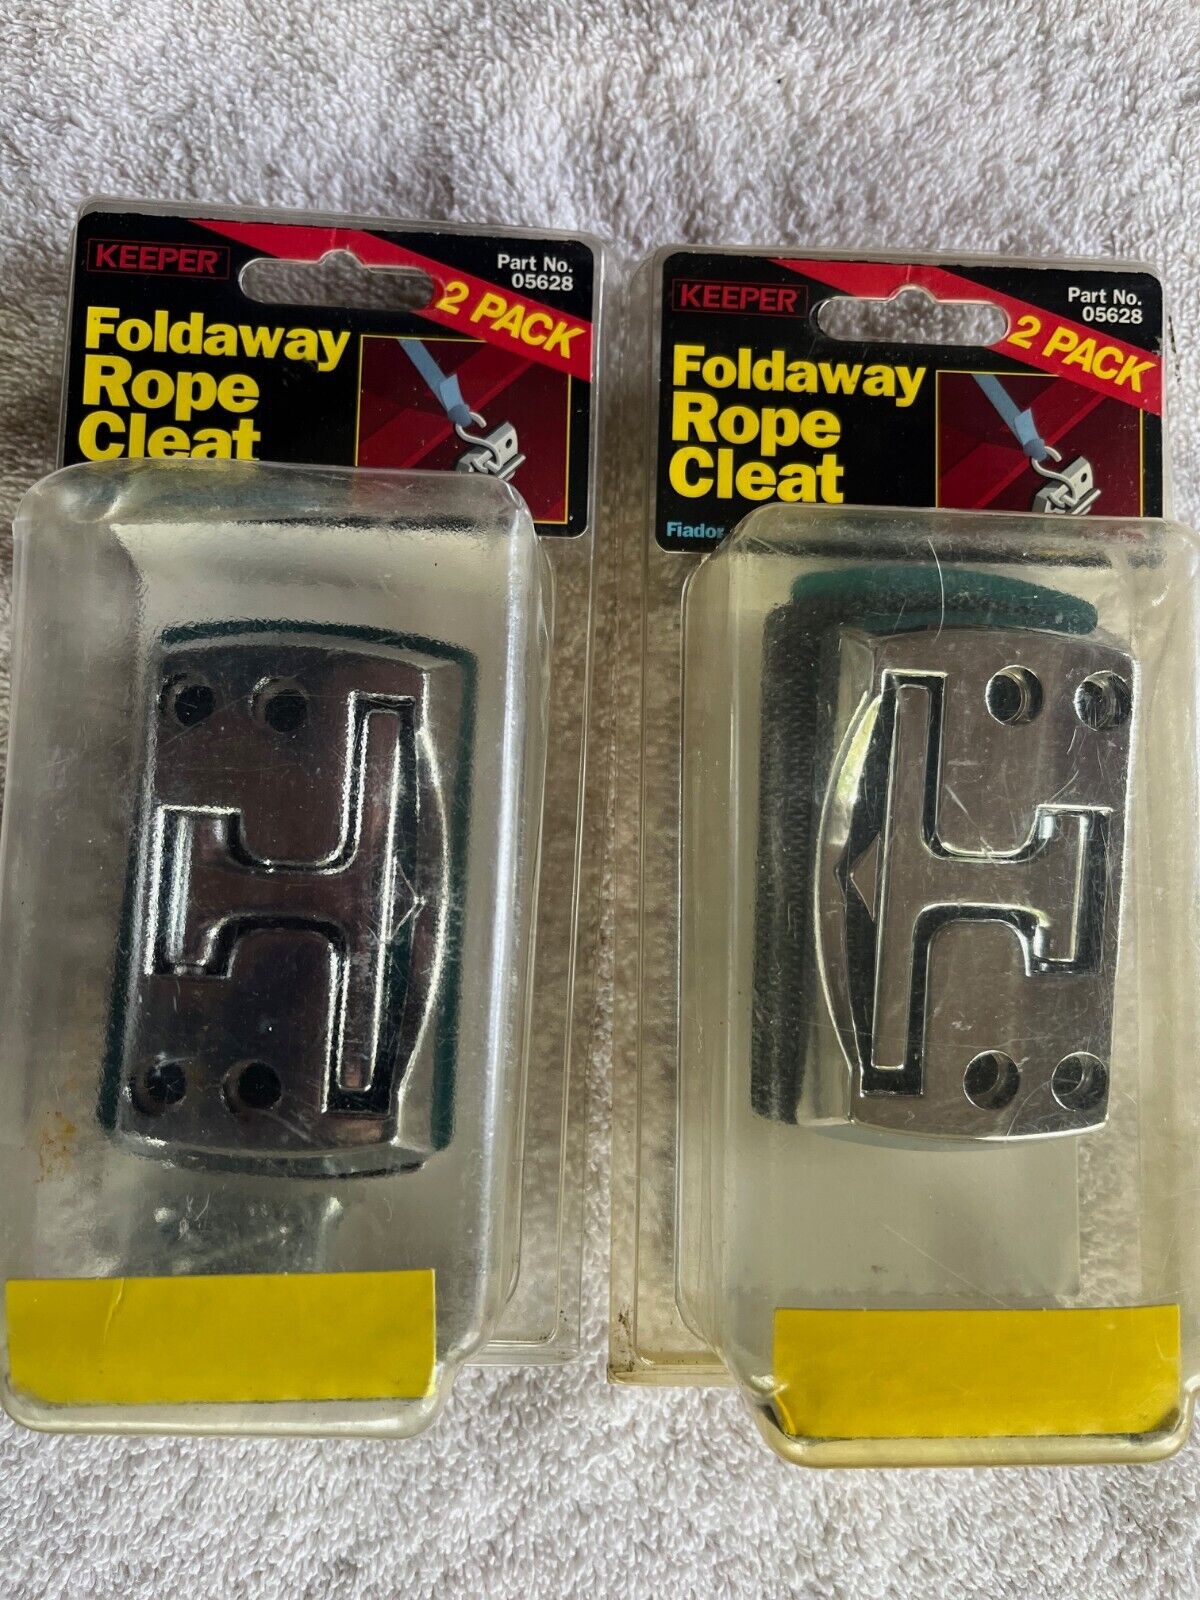 KEEPER Foldaway Rope Cleat two 2-Pack (4) #05628 Chrome 150lb truck boat trailer